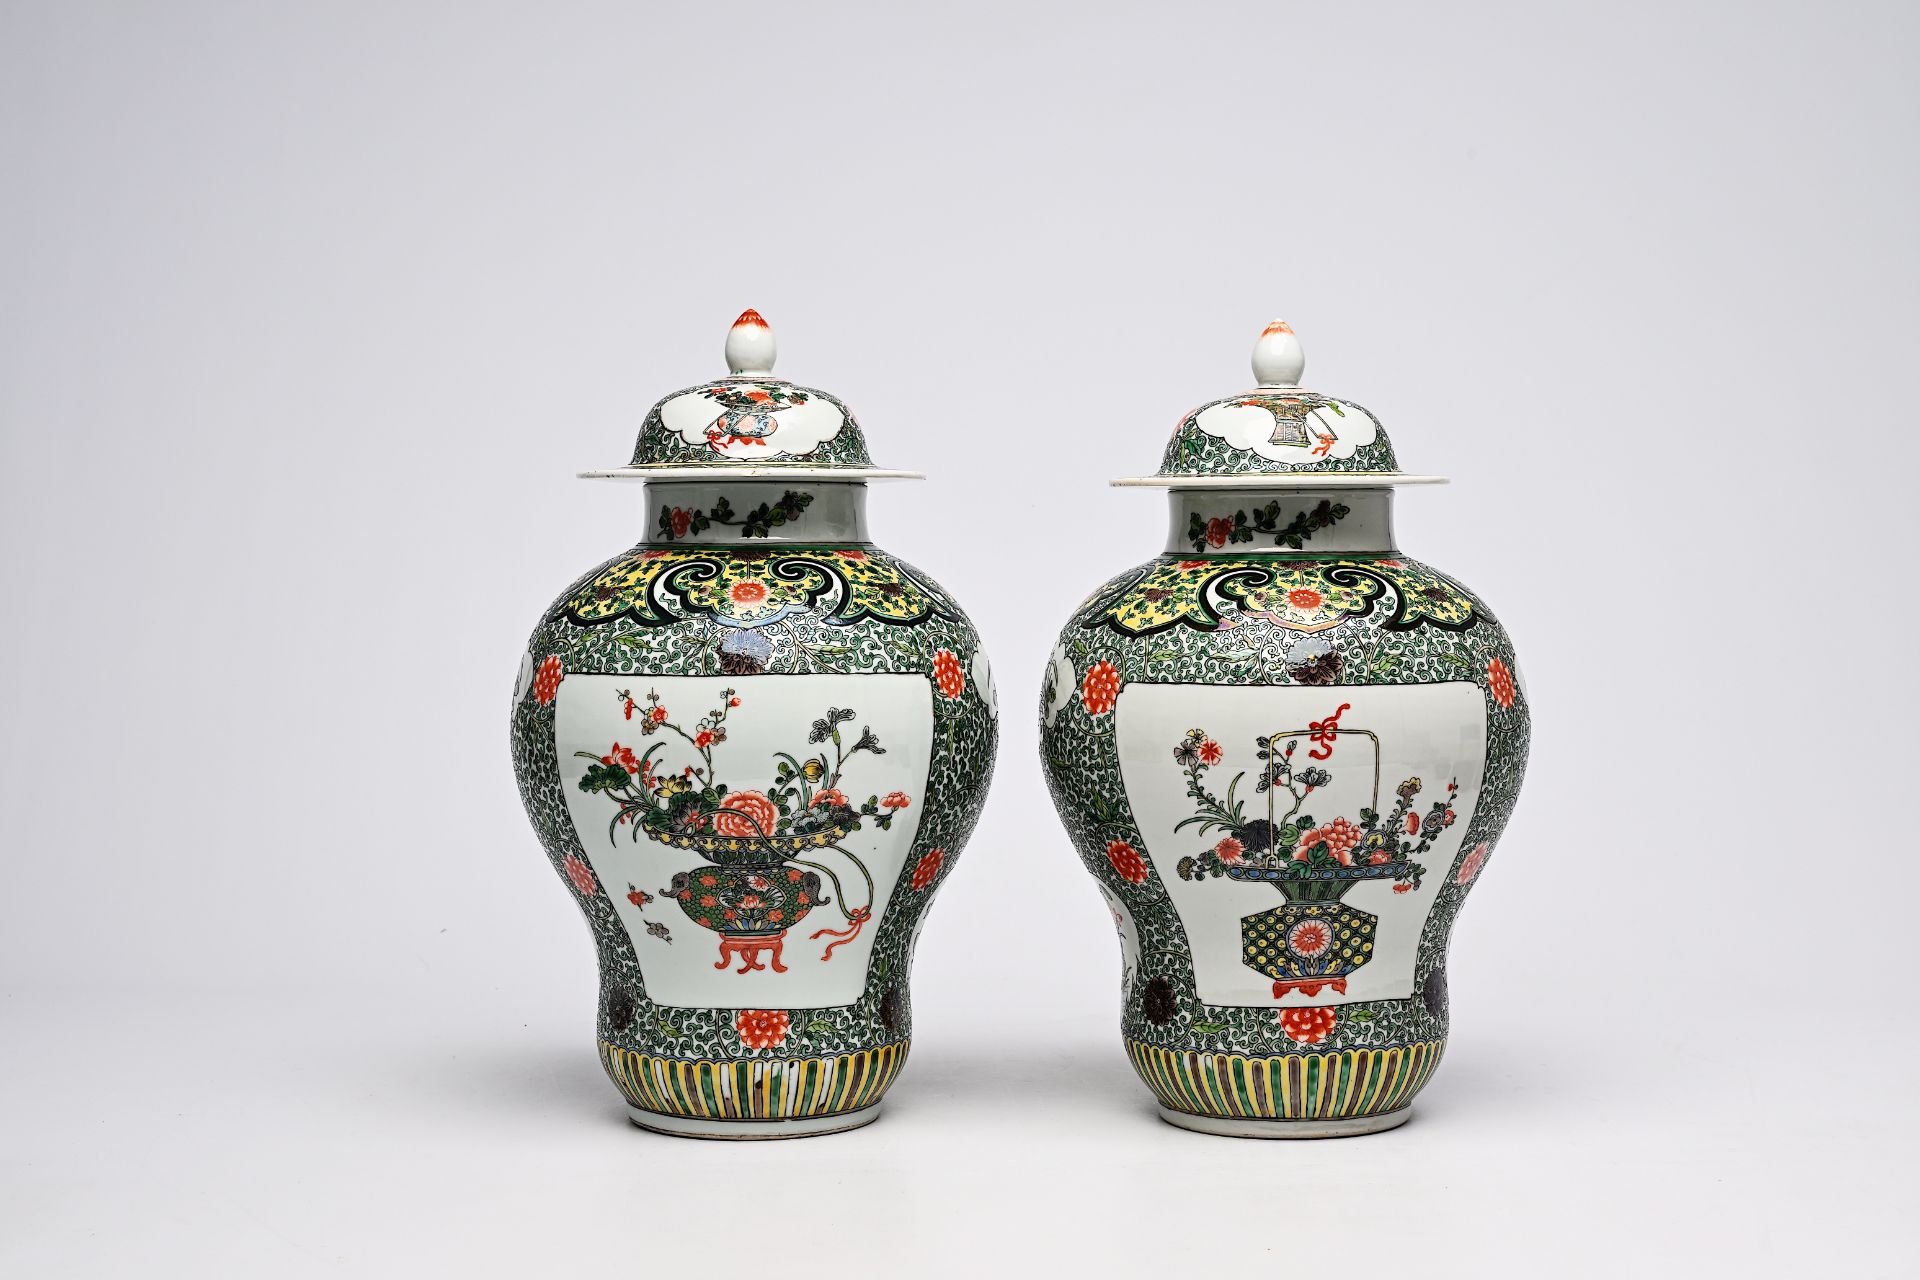 A pair of Chinese famille verte vases and covers with flower baskets and floral design, 19th C.